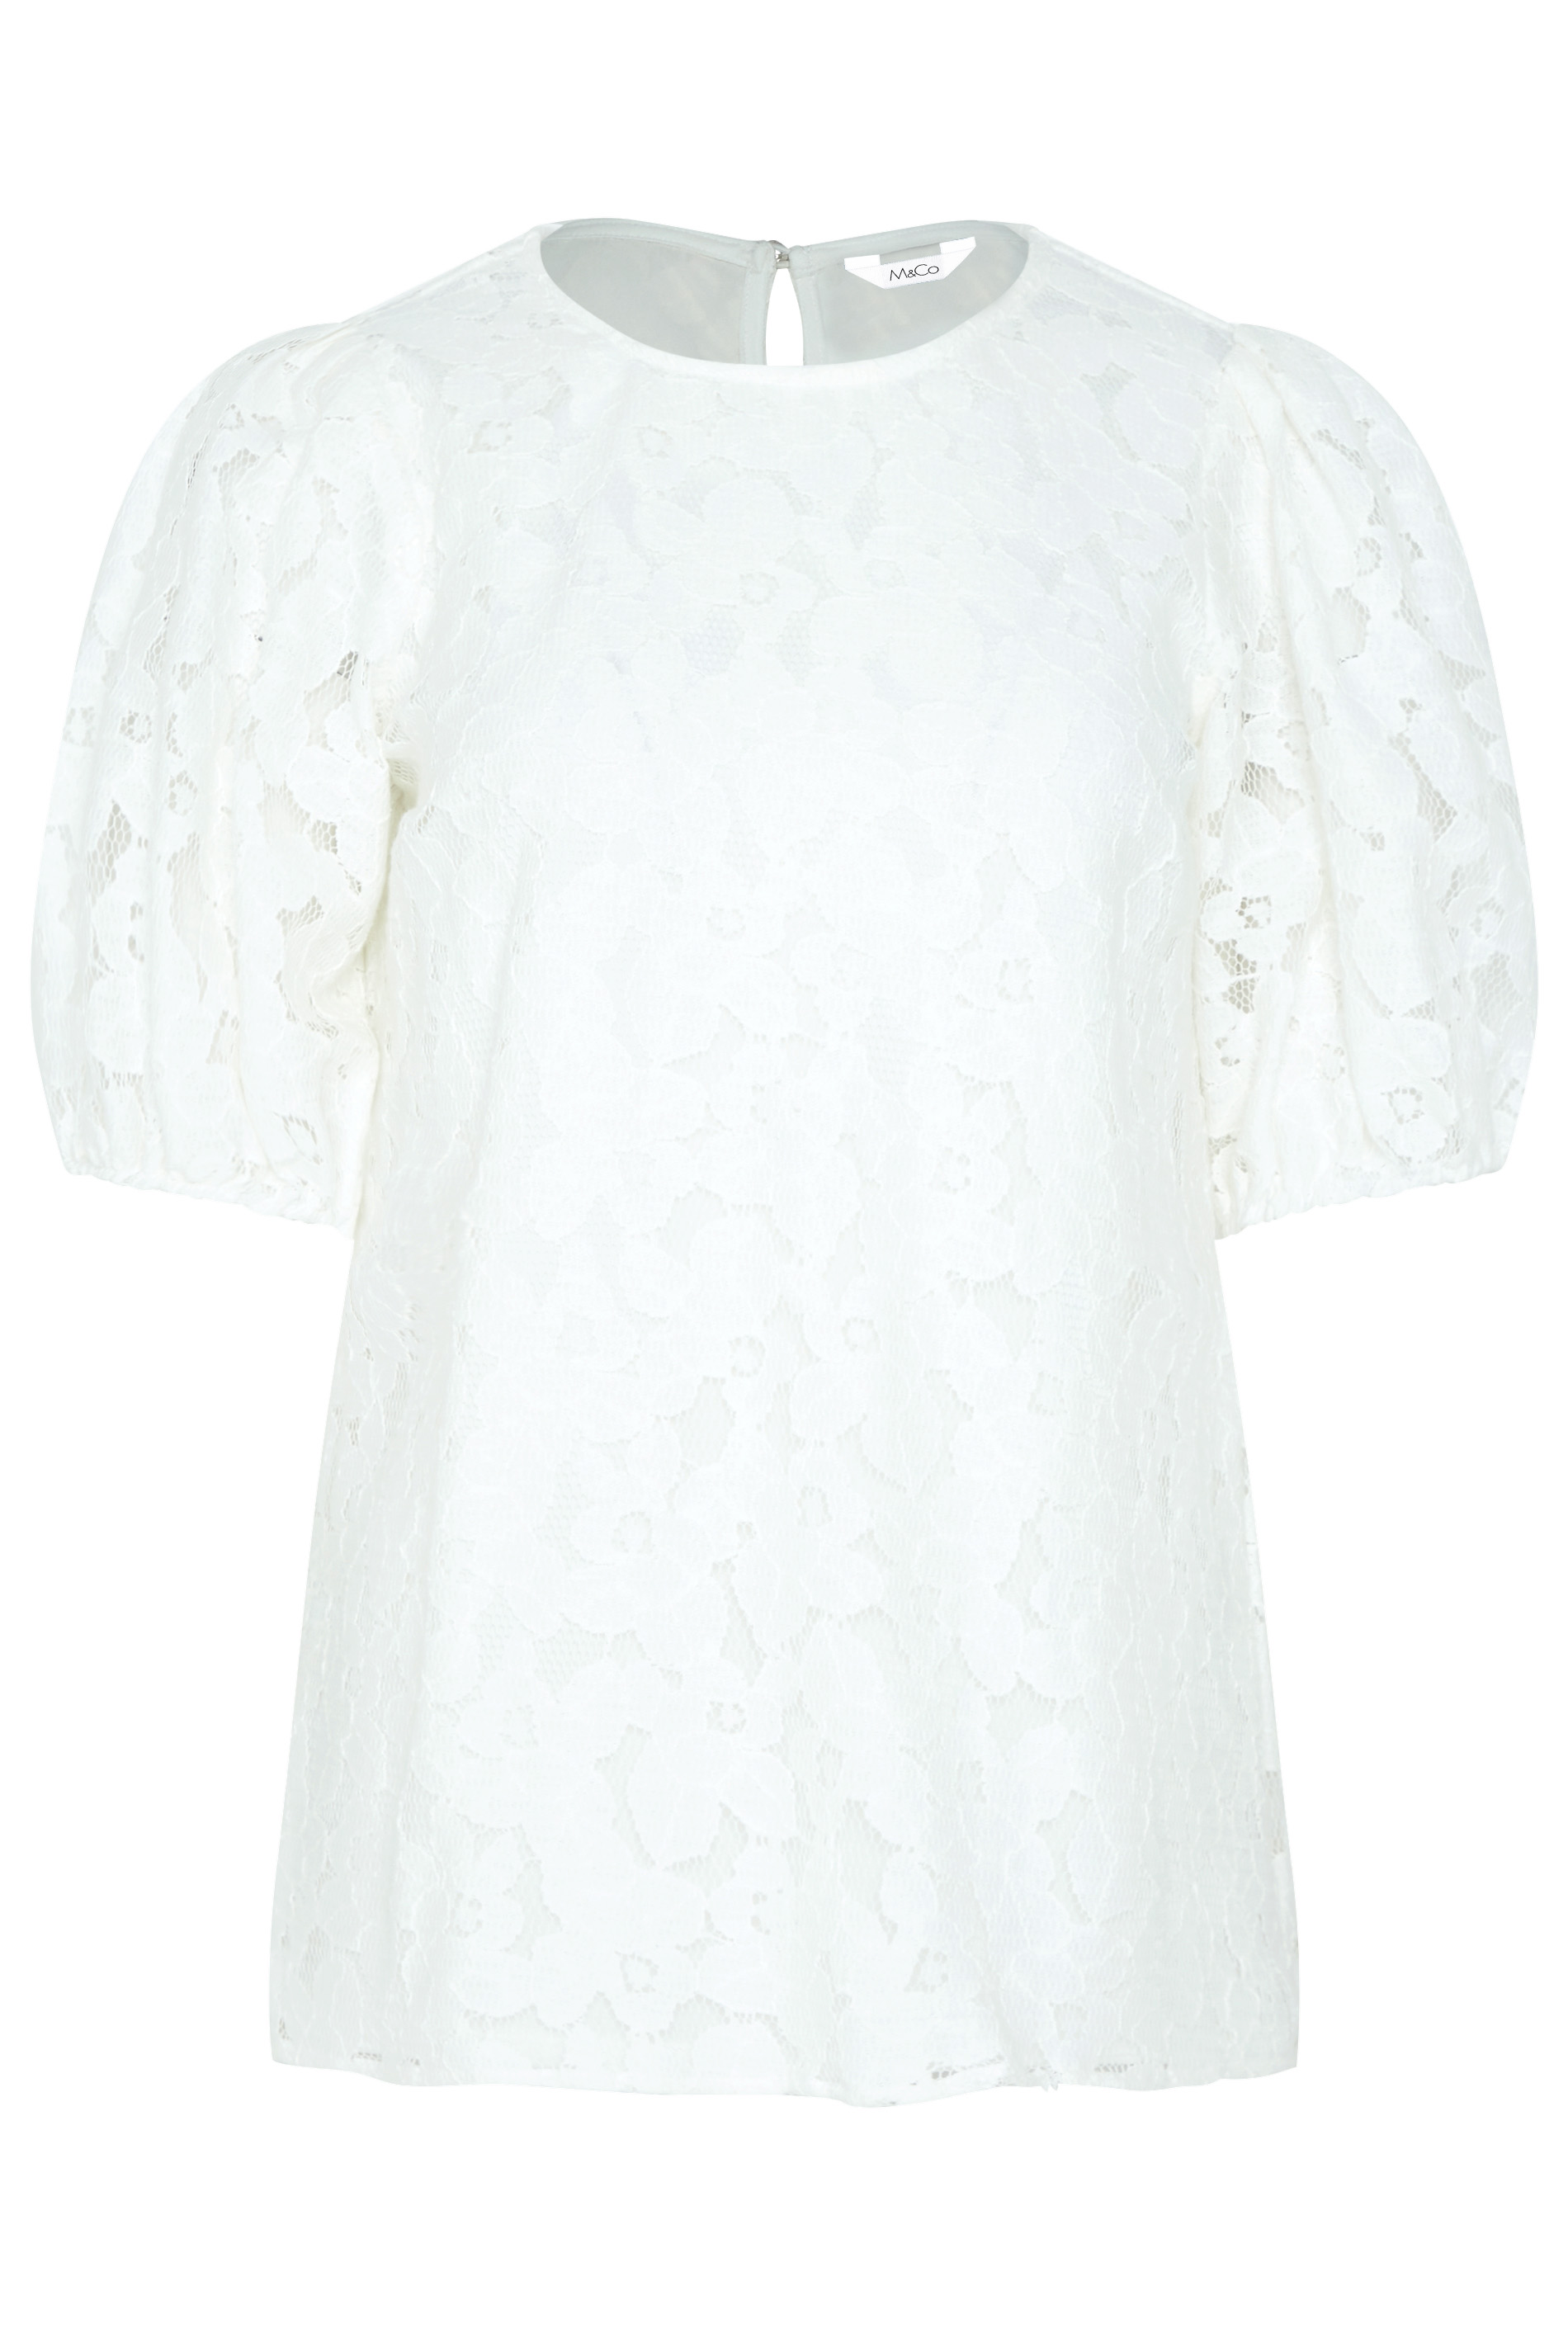 M&Co White Lace Puff Sleeve Blouse | M&Co